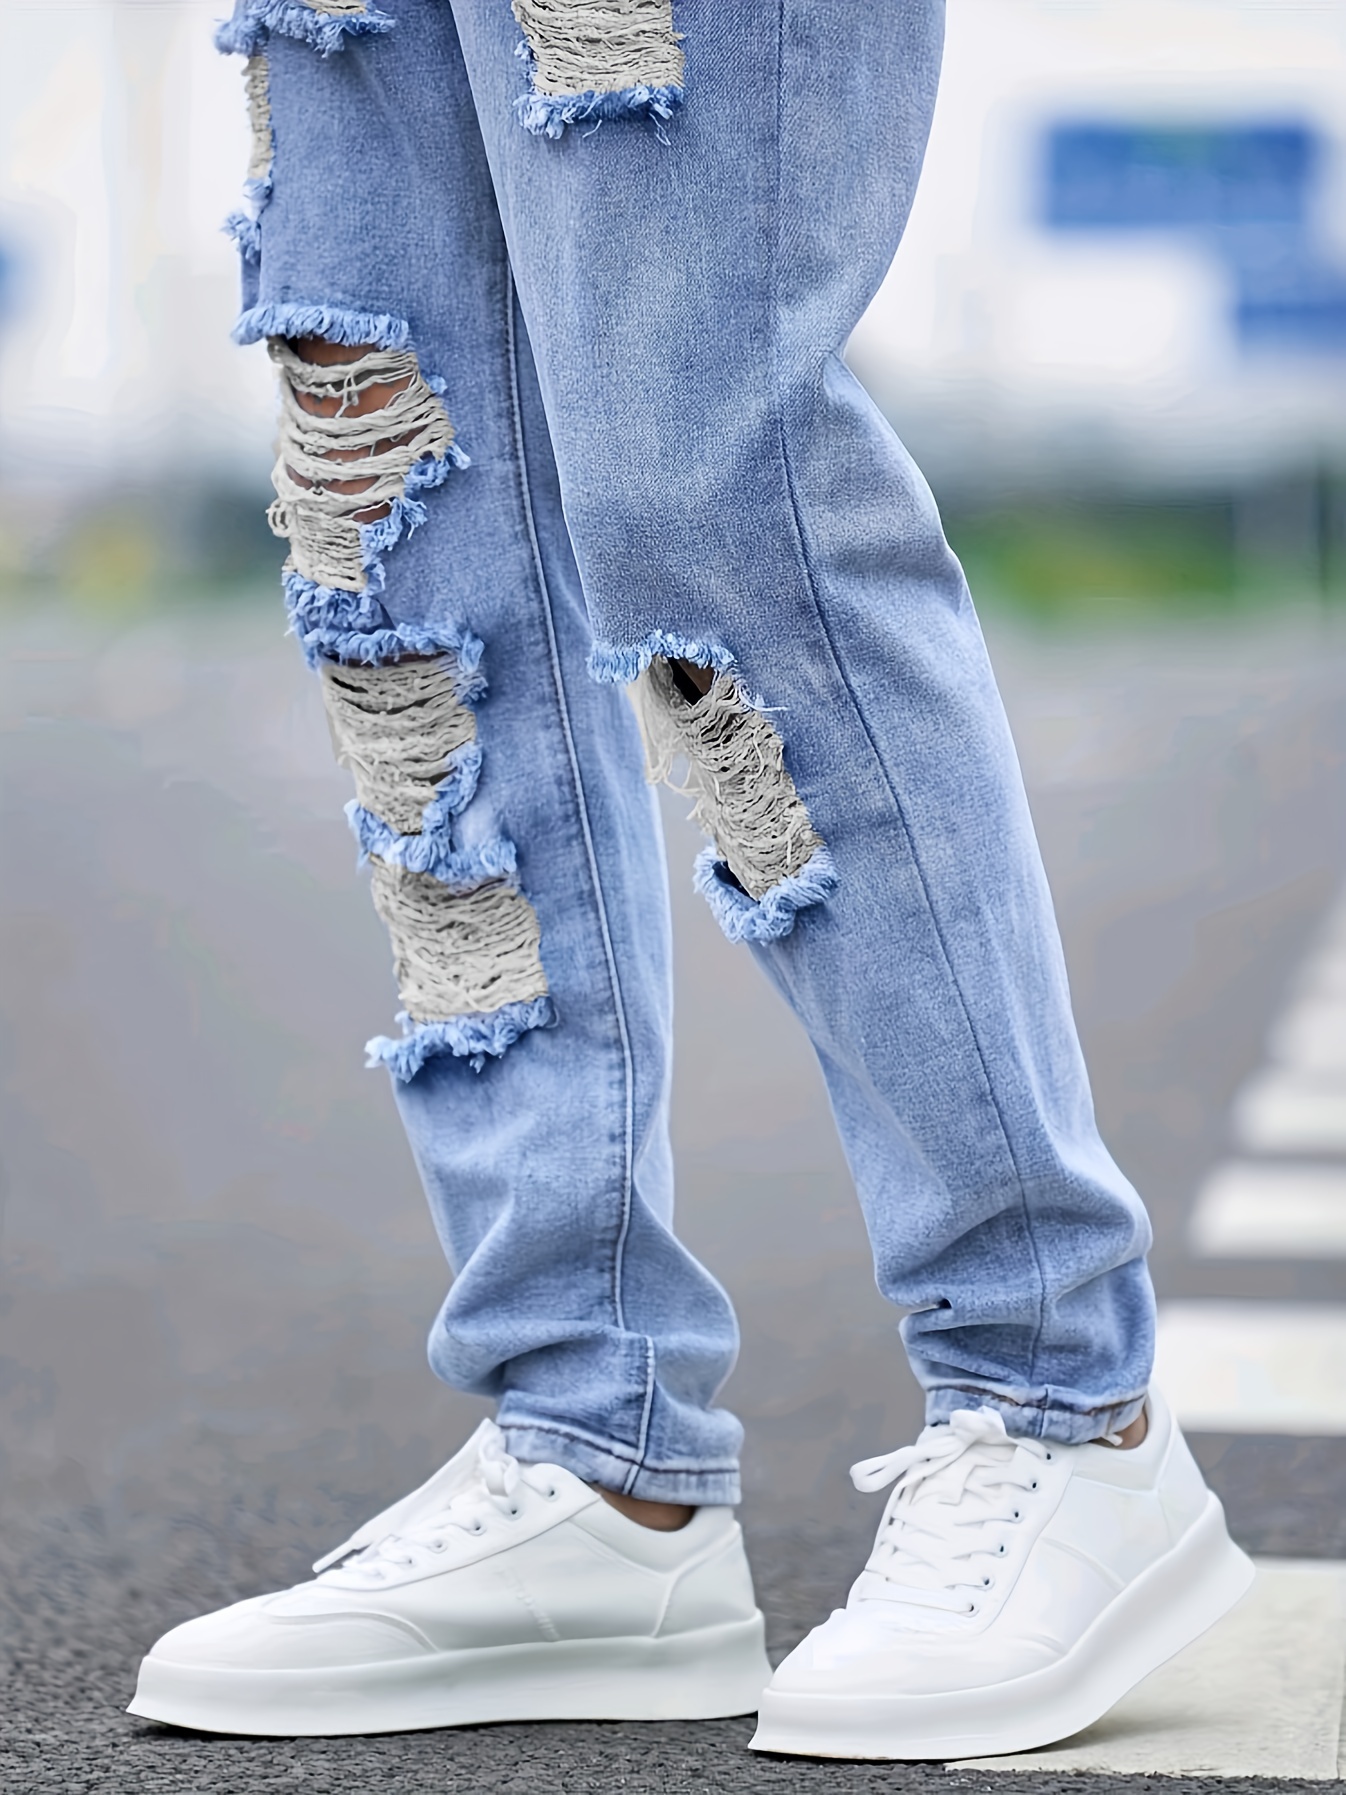 Blue Ripped Jeans, Men's Jeans